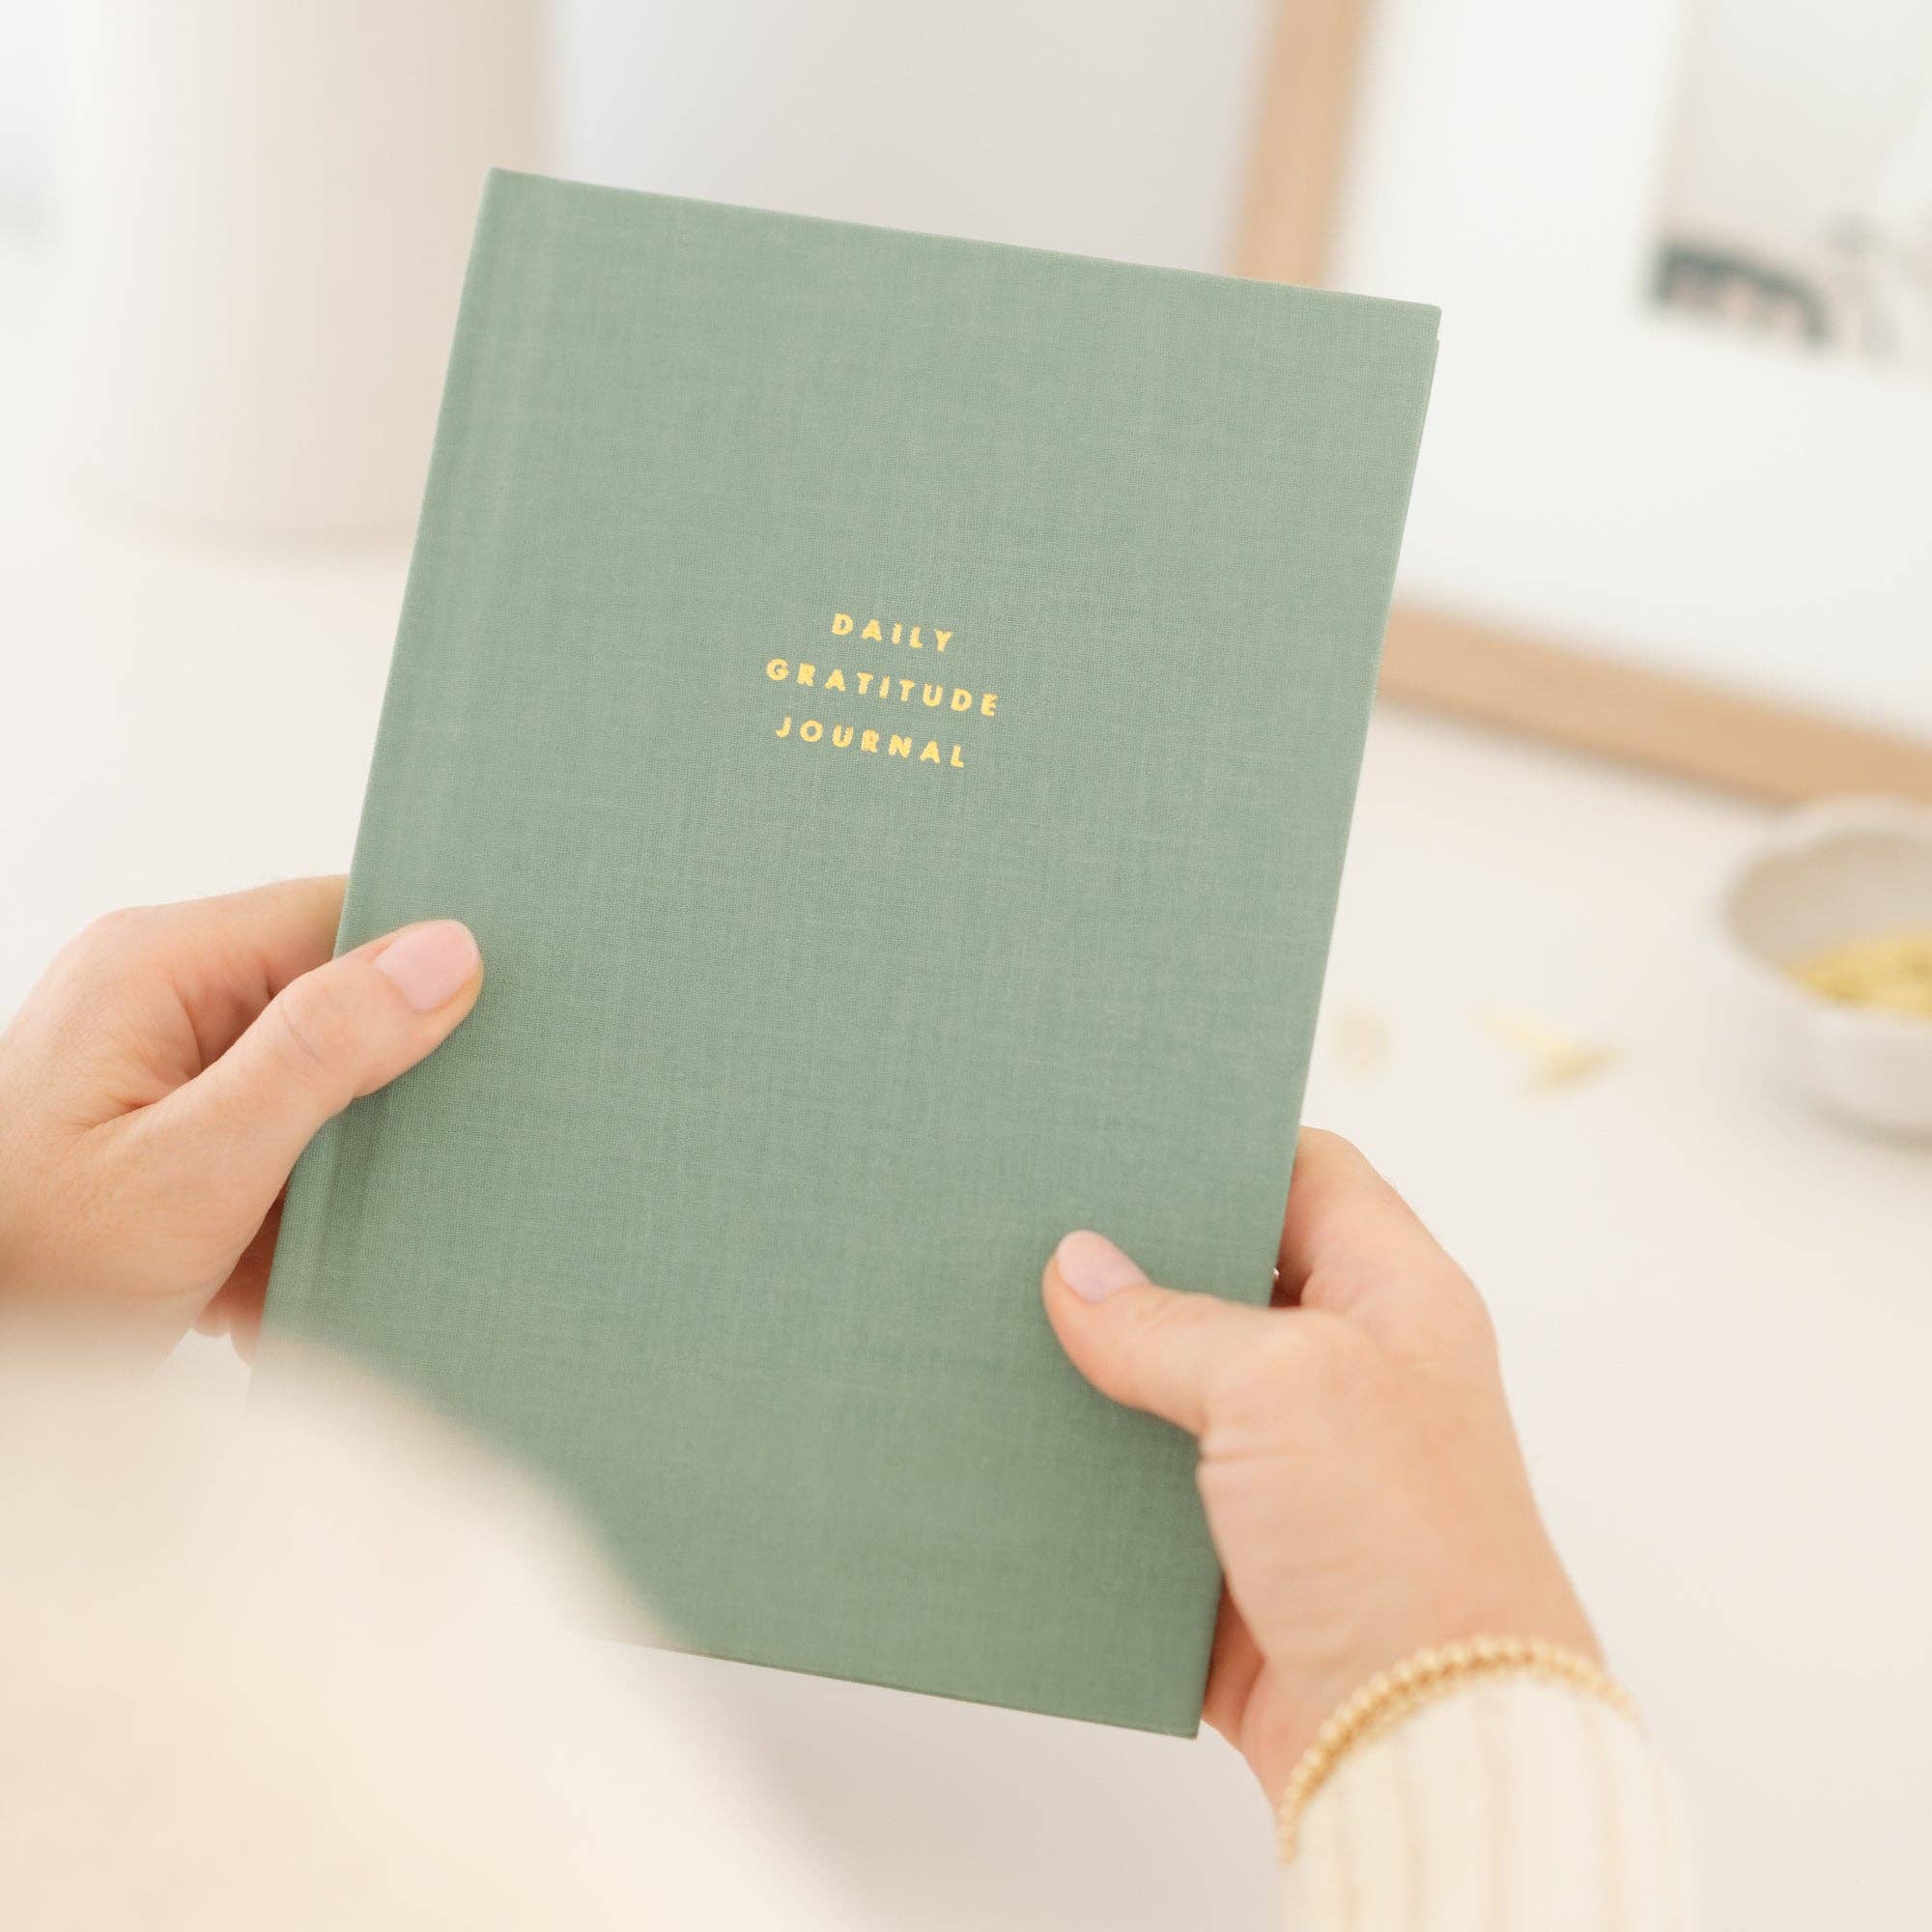 Hands holding Daily gratitude journal with hardcover binding and "DAILY GRATITUDE JOURNAL" text.